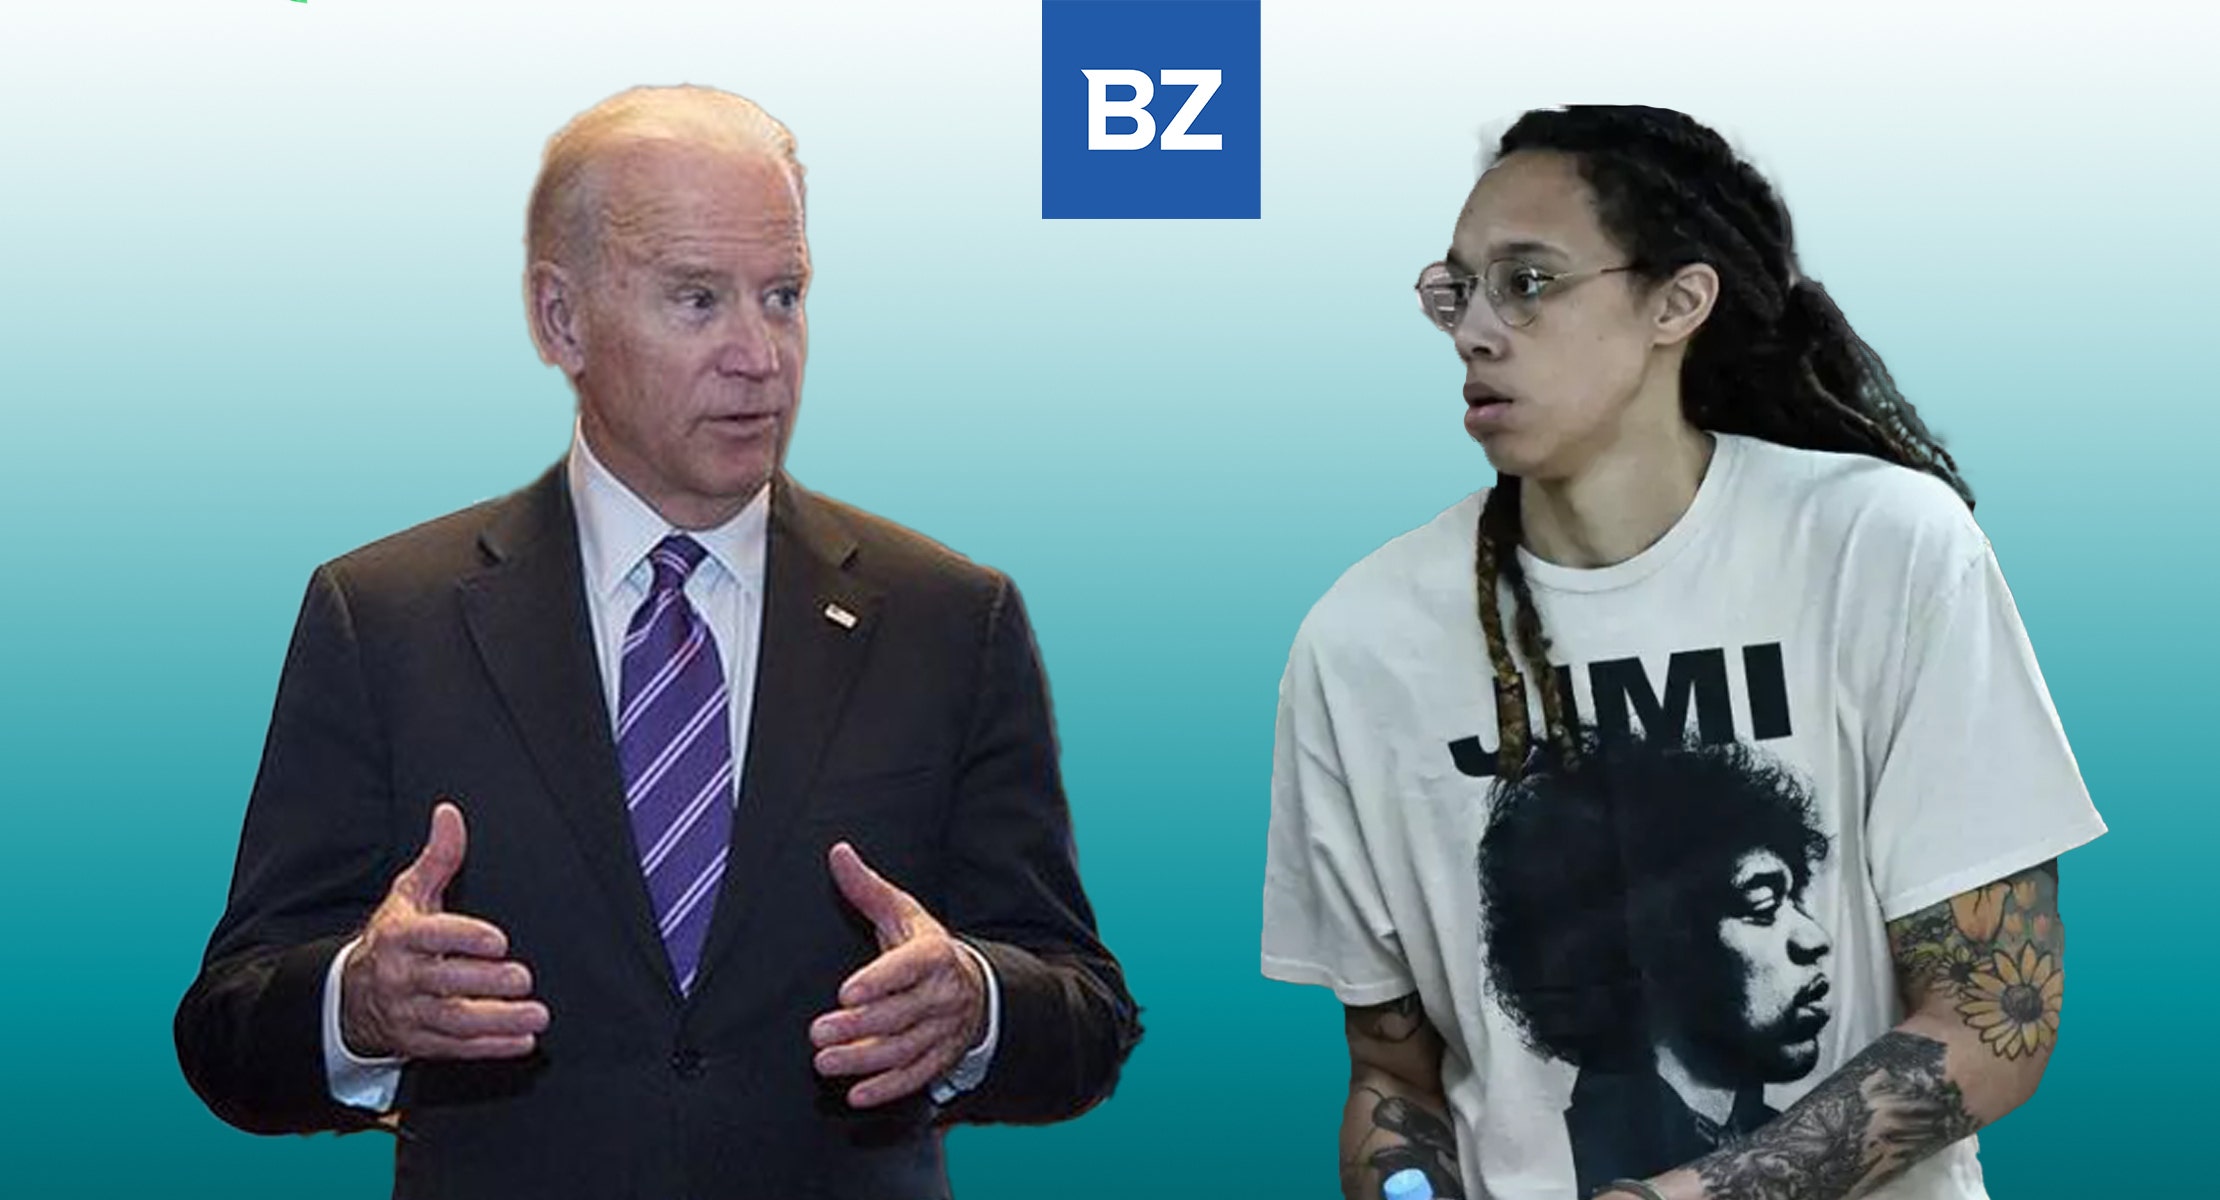 Brittney Griner Pleads Guilty, Biden Lashes Out Over Her Detention, Russia Calls It 'Hype,' What's Next?